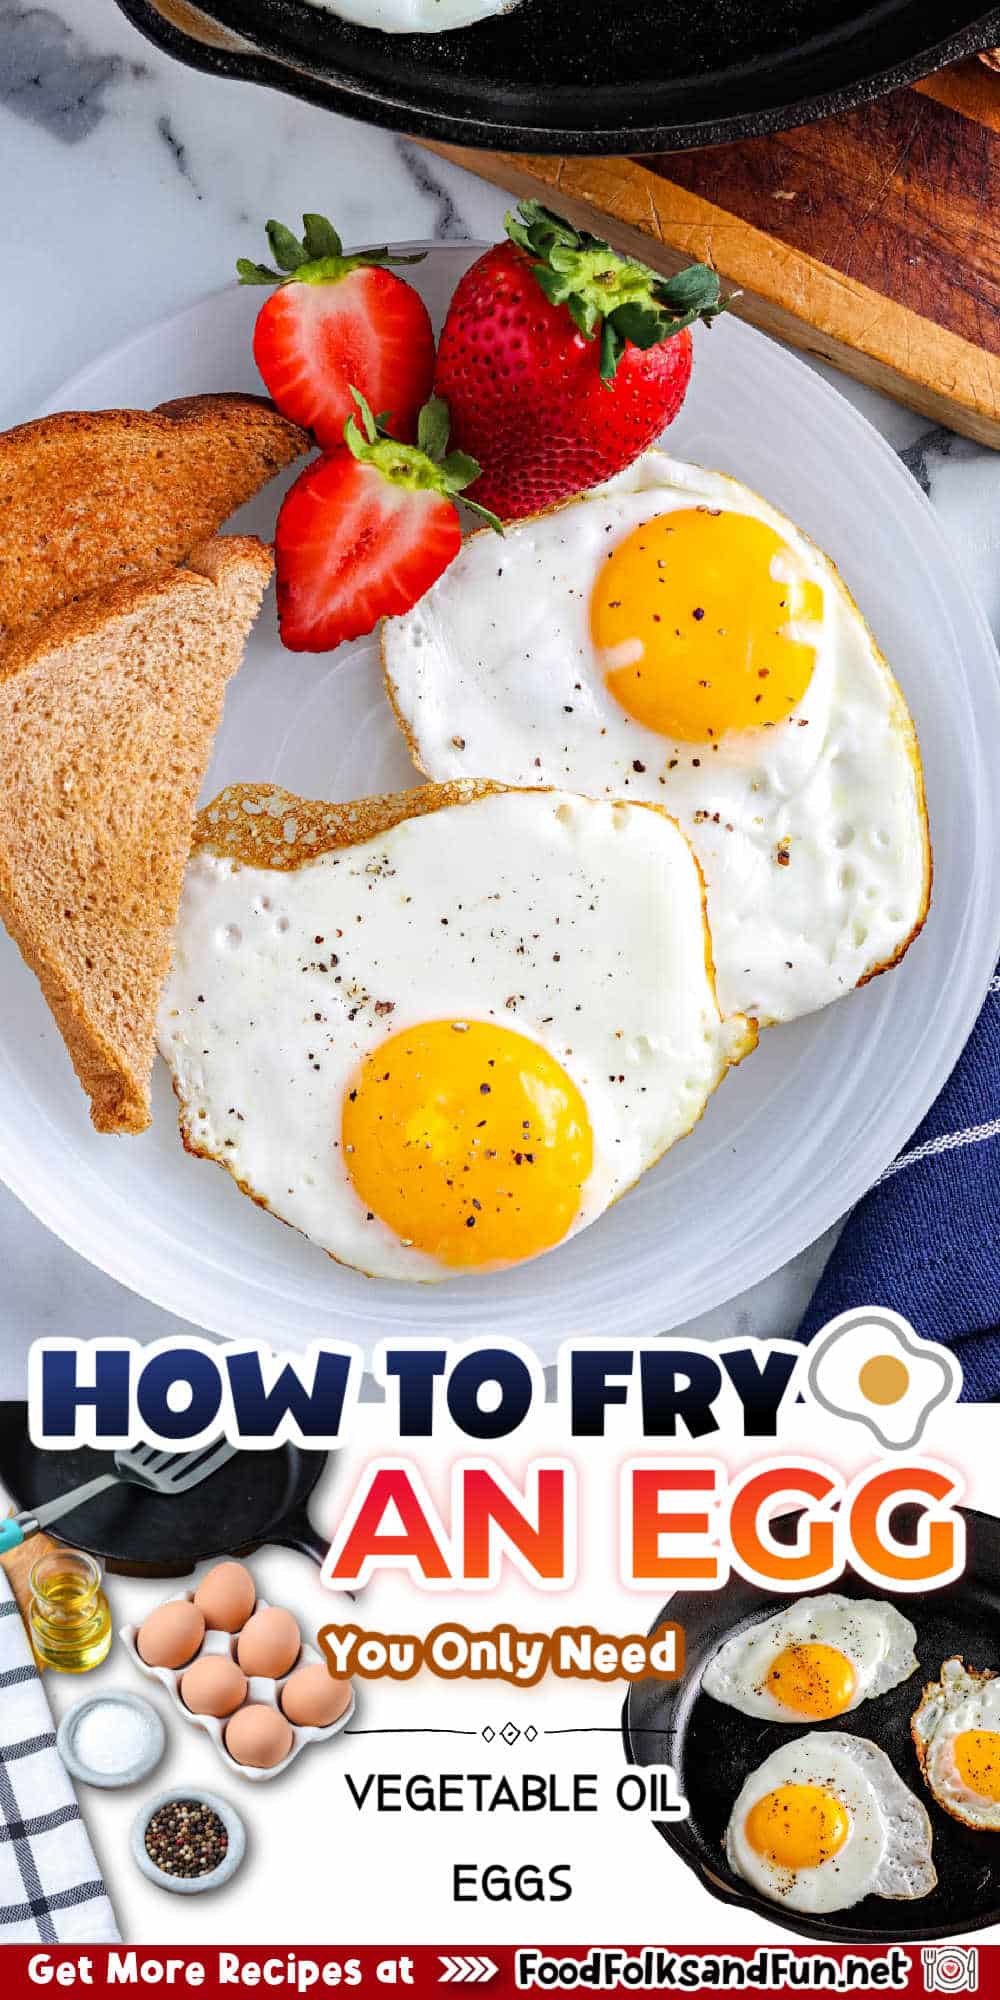 Making fried eggs is simple. All you need is eggs, salt, pepper, vegetable oil, and a little bit of patience. Making this savory breakfast staple takes just a few minutes when you follow this How To Make a Fried Egg tutorial. via @foodfolksandfun